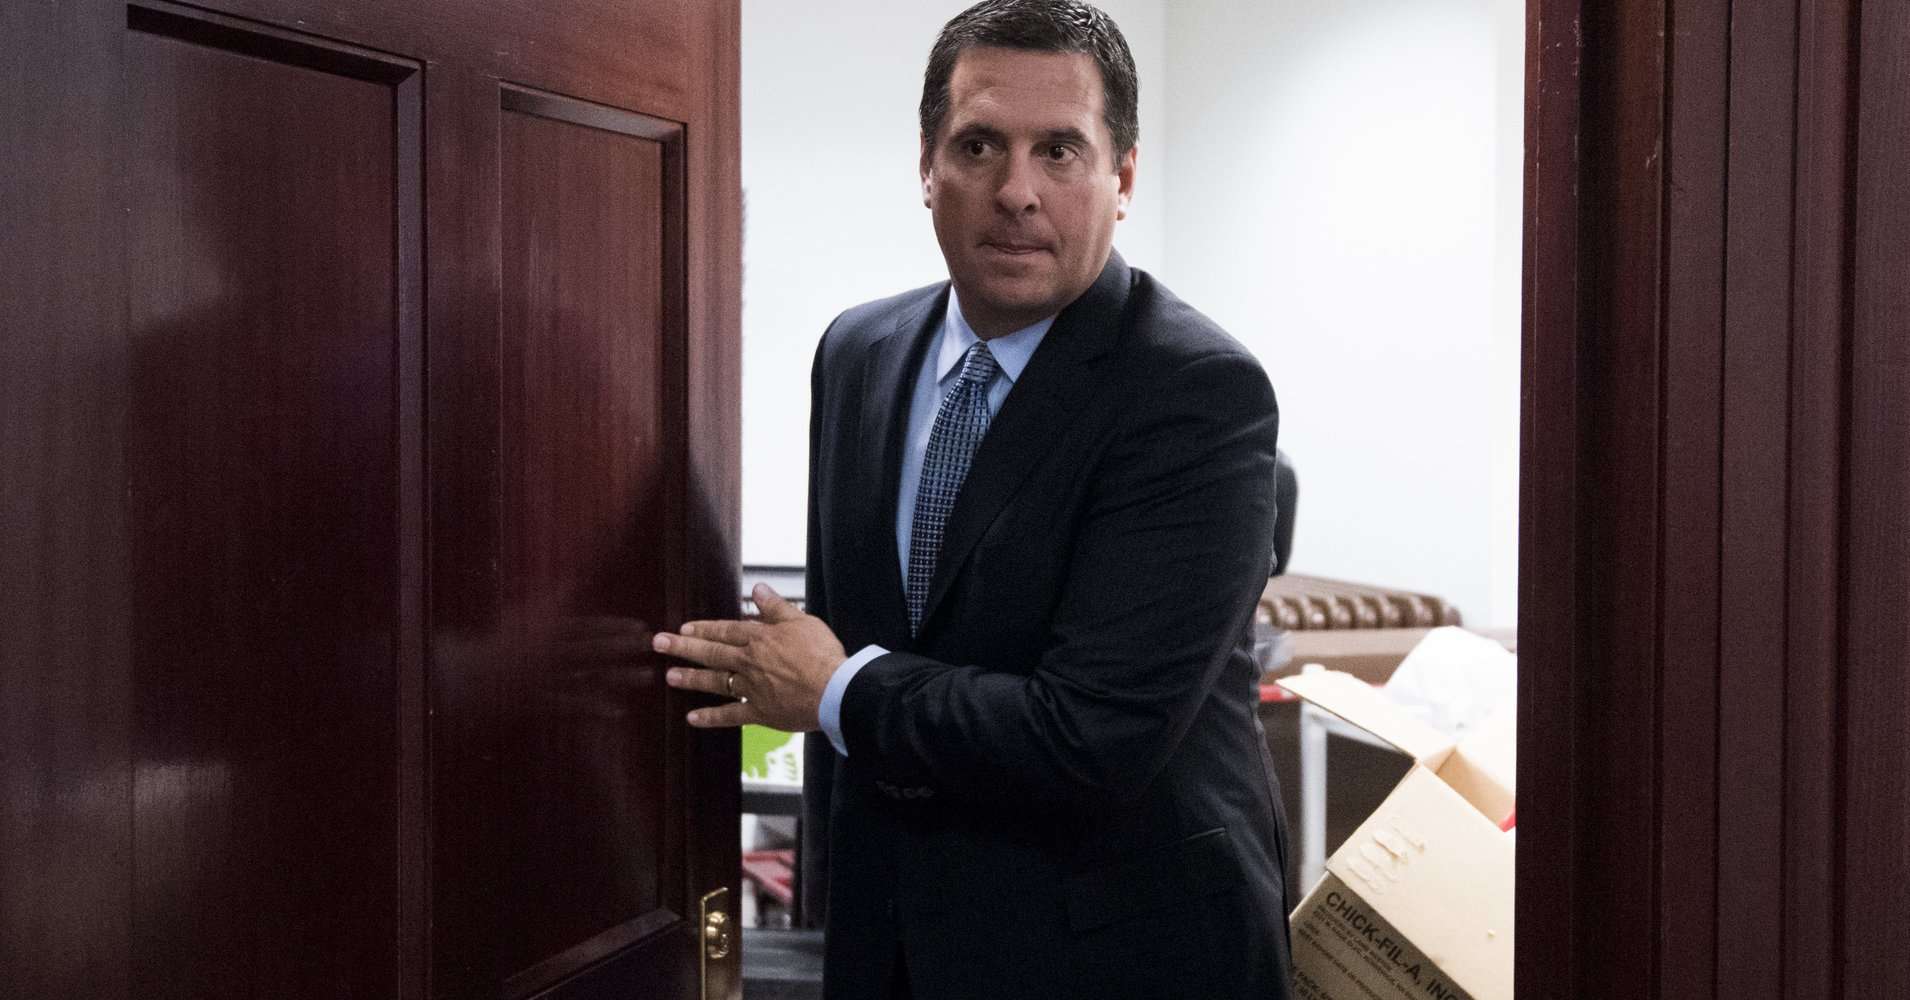 image for House GOPers Say A Secret Memo Could End The Trump-Russia Probe. Their Staff Wrote It.